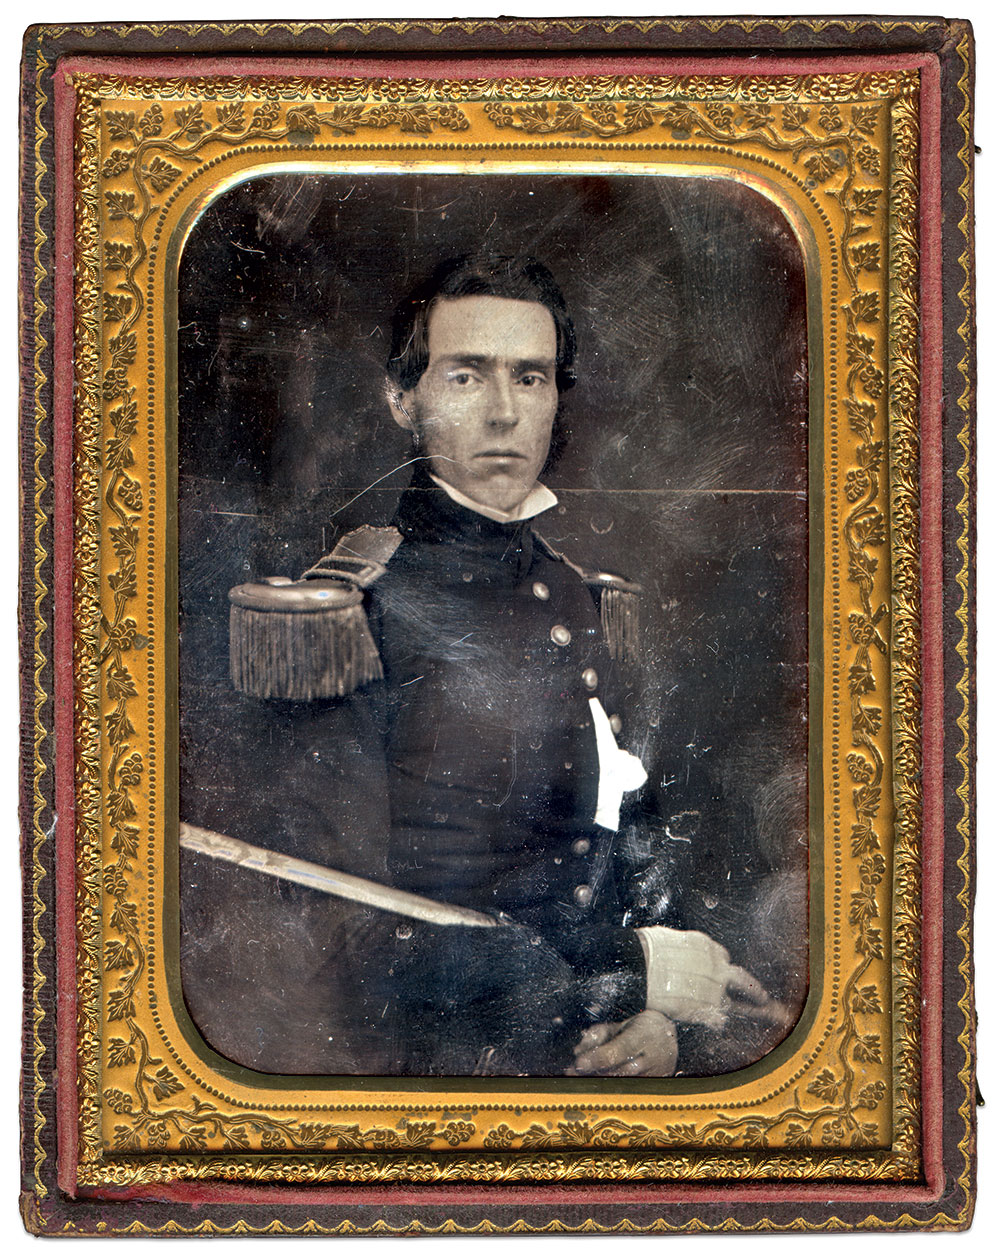 Half-plate daguerreotype by an anonymous photographer.